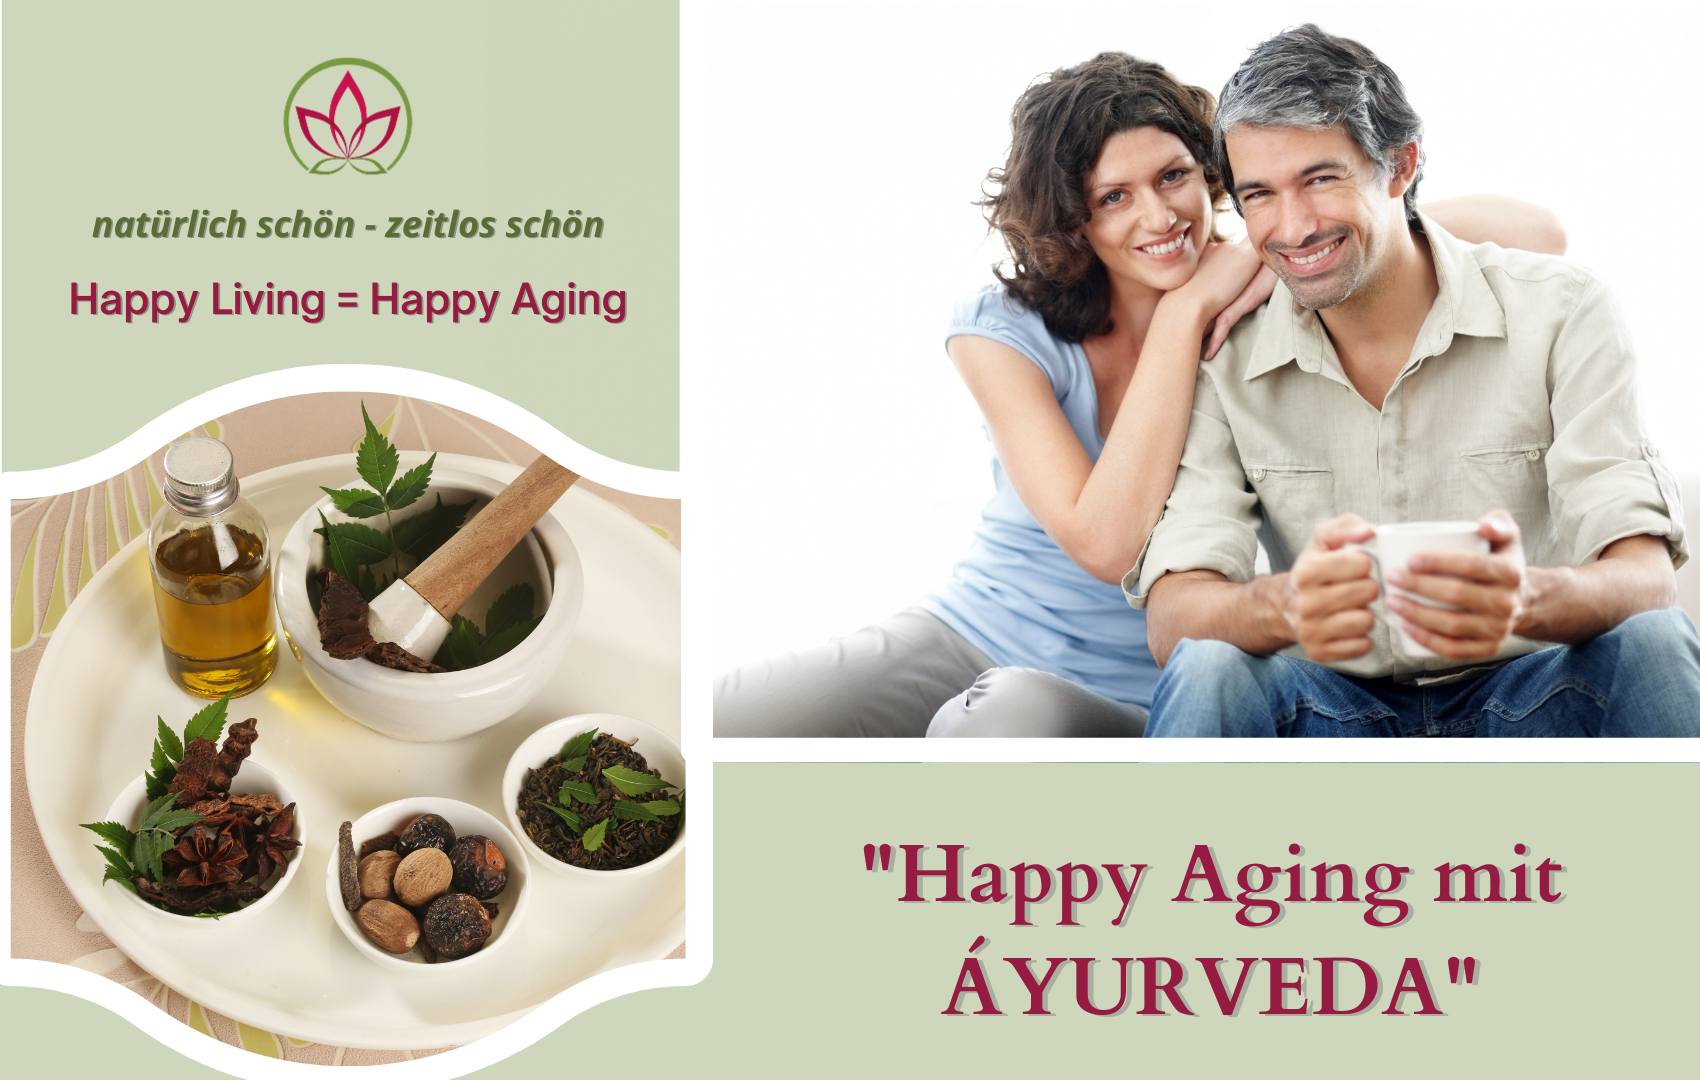 You are currently viewing Happy Aging mit AYURVEDA“